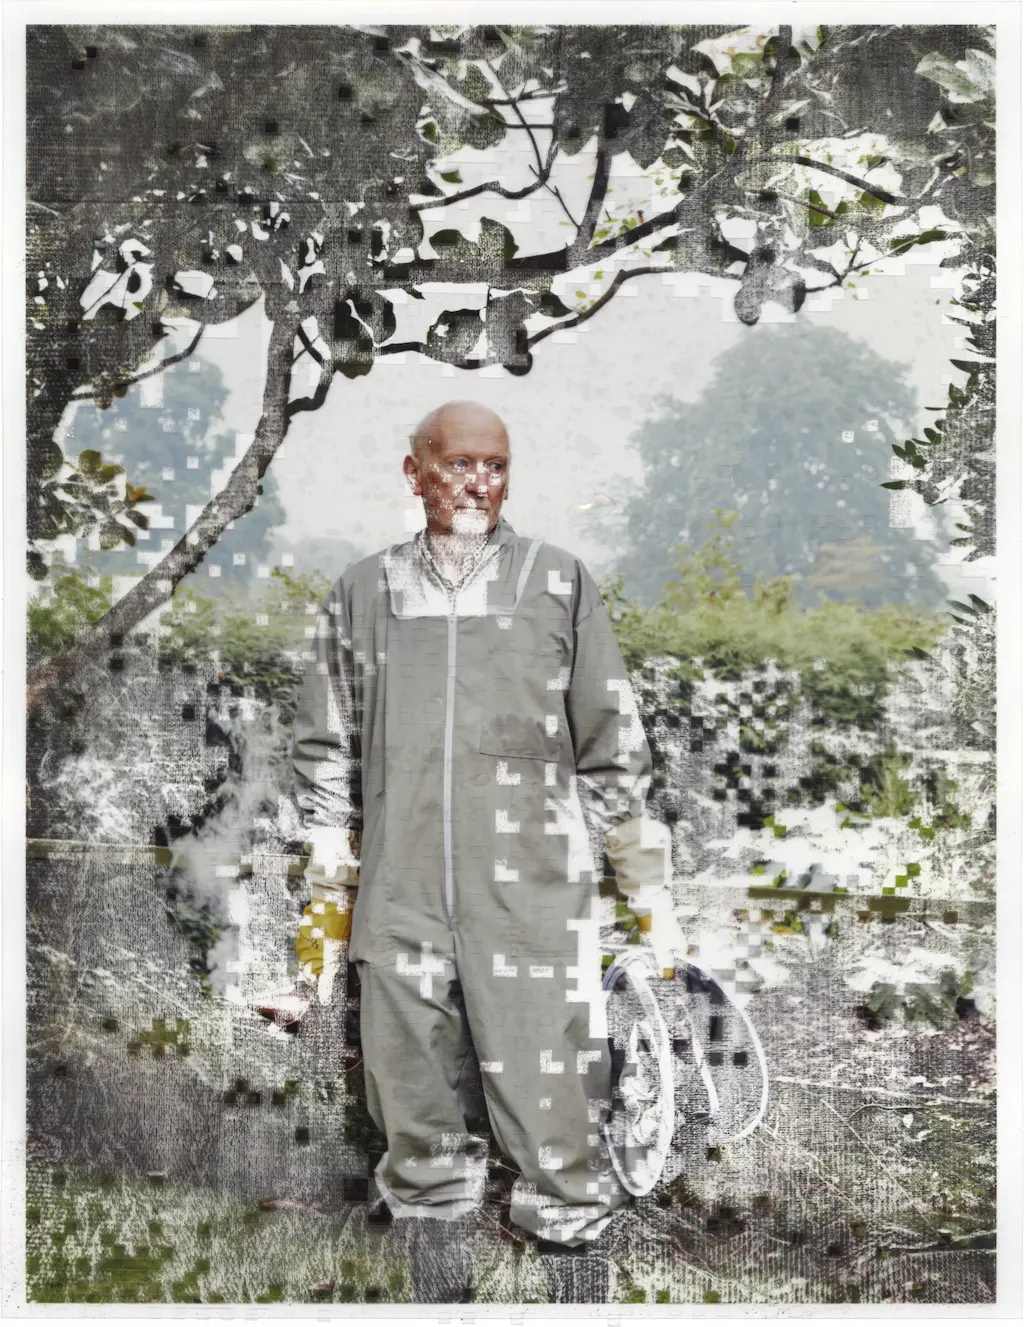 A beekeeper is standing aloof in his garden. His face, body, and surroundings are eroding away around him. Machine cut transparent vinyl has been used as a mask for the acetate bath this image has taken, the paper towels used to dry it off have left textured marks on the exposed plotter ink.